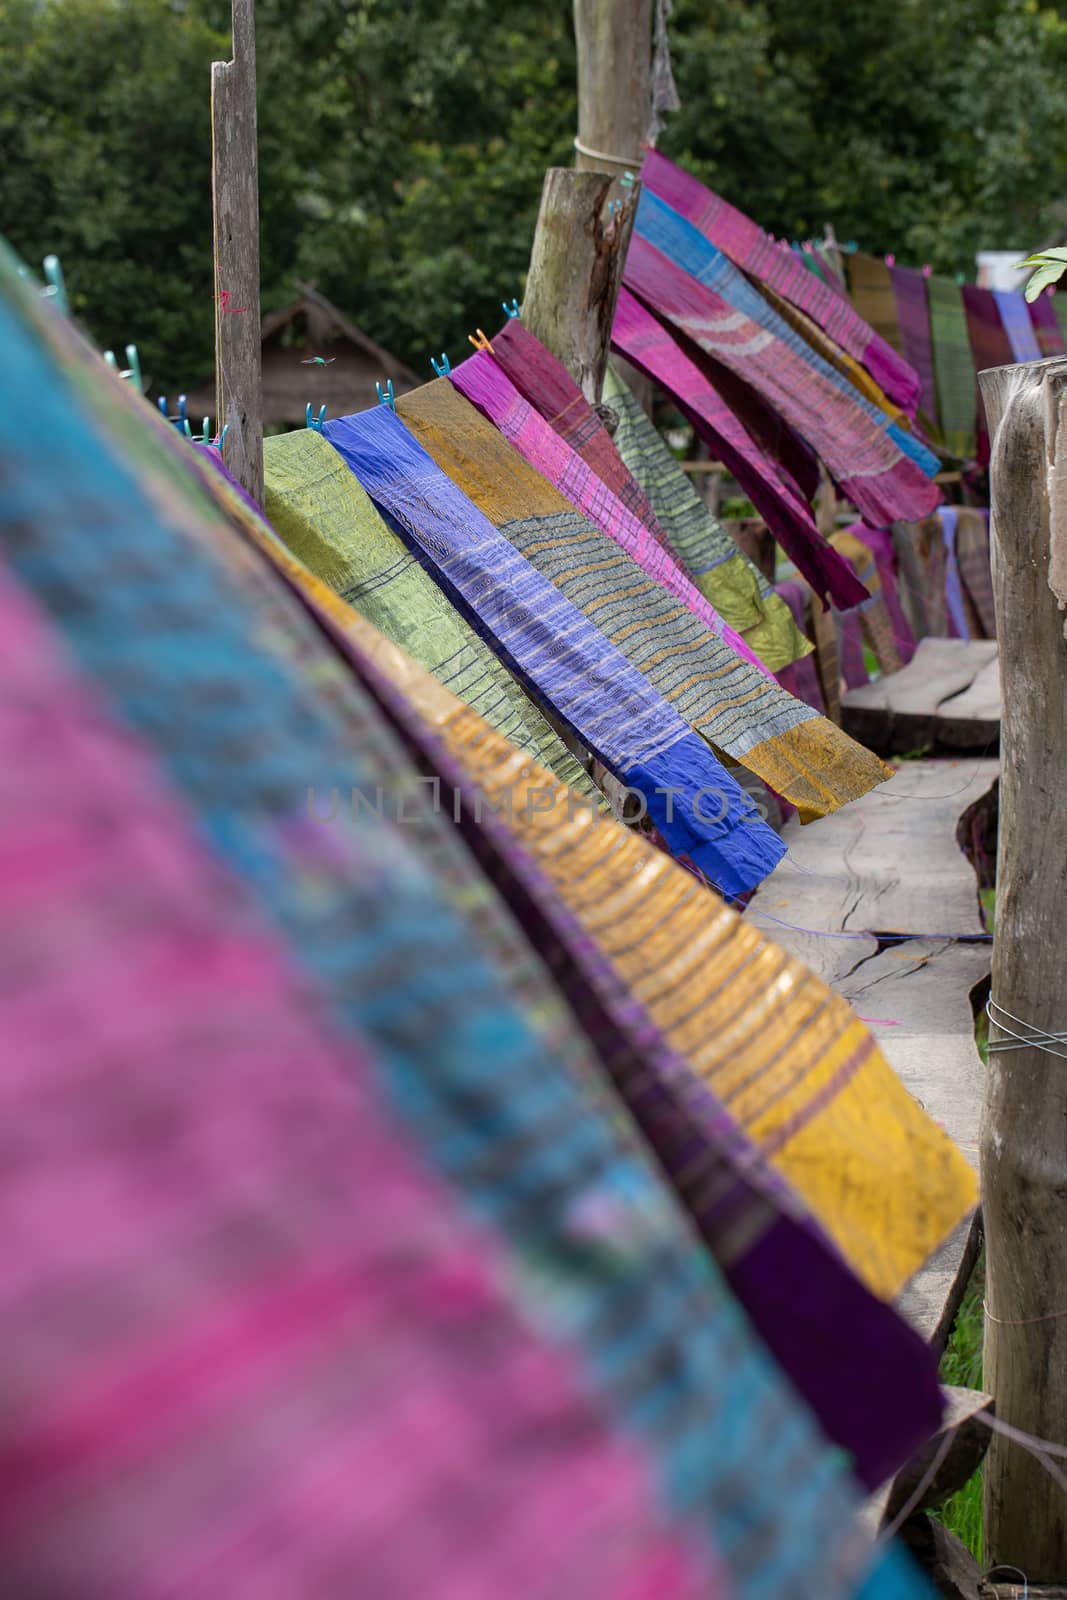 Hand woven clothes hang on wooden walkways in rice field at Sila by kaiskynet